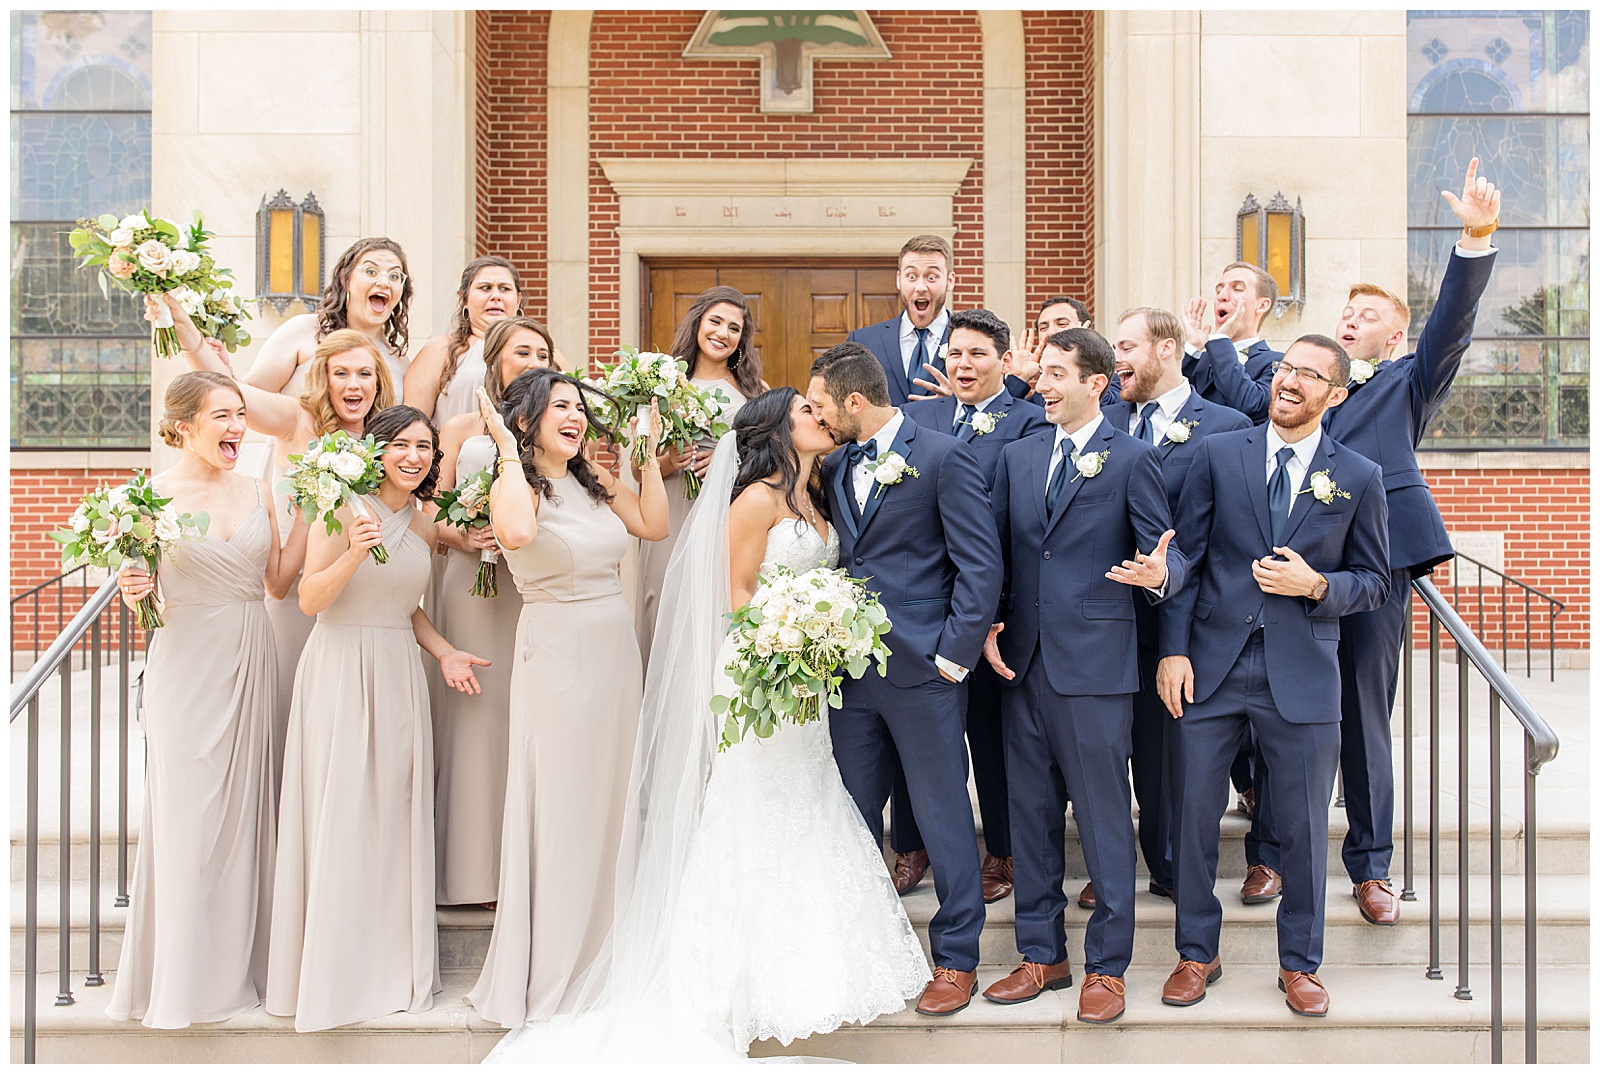 Wedding Photographers in Birmingham, Alabama Katie & Alec Photography | Our 300th Blog Post